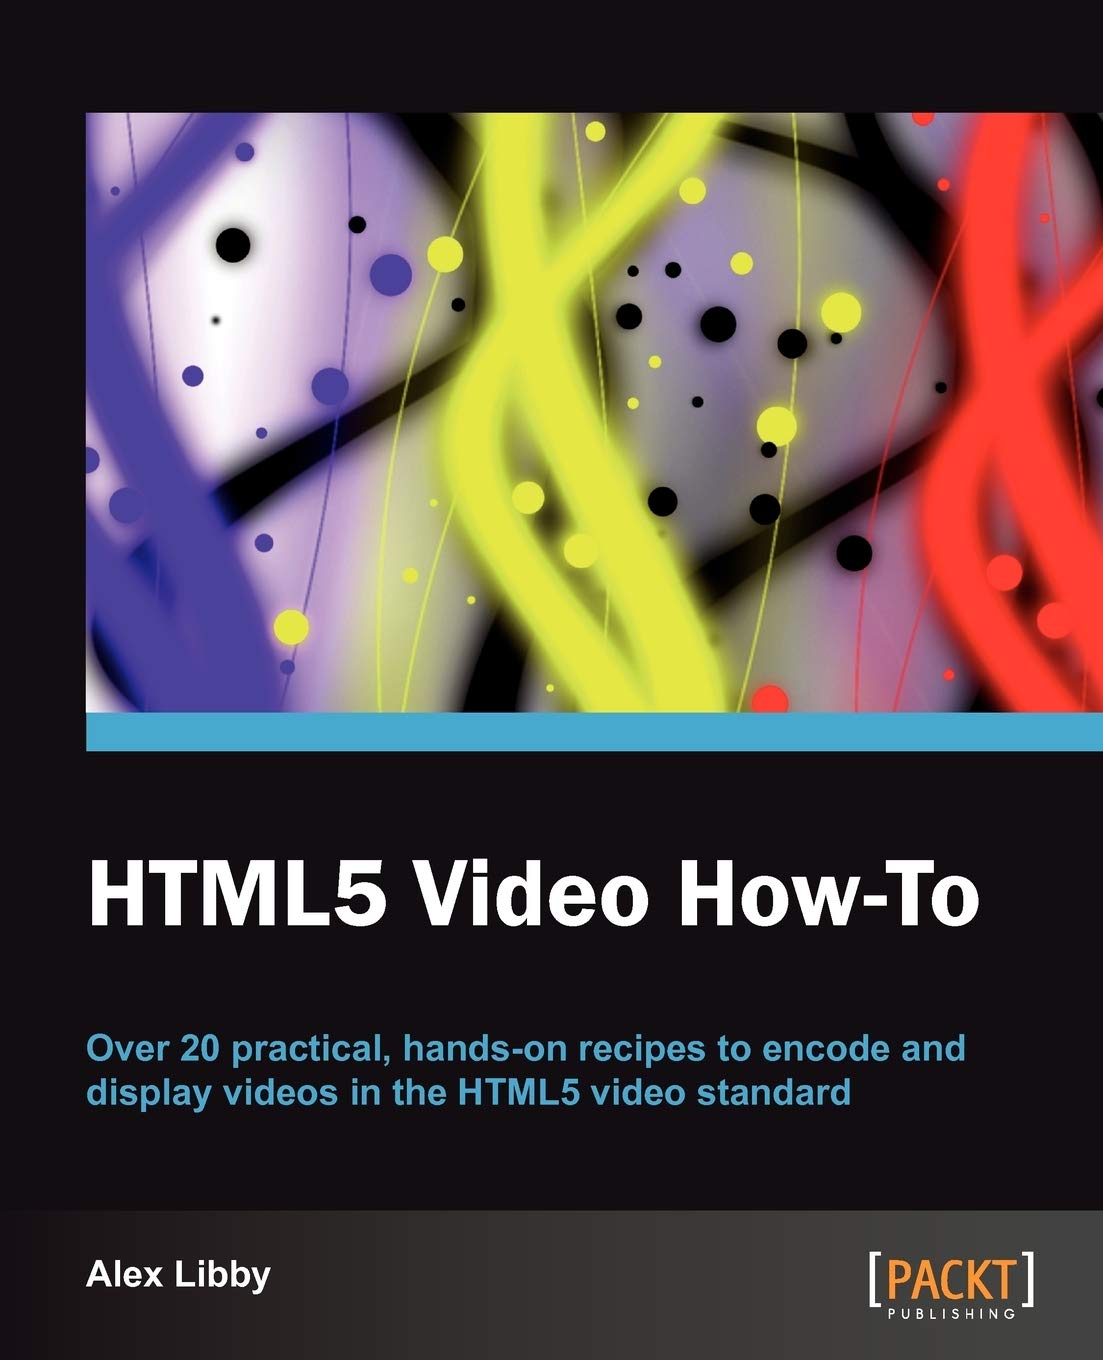 HTML5 Video How-To by Alex Libby